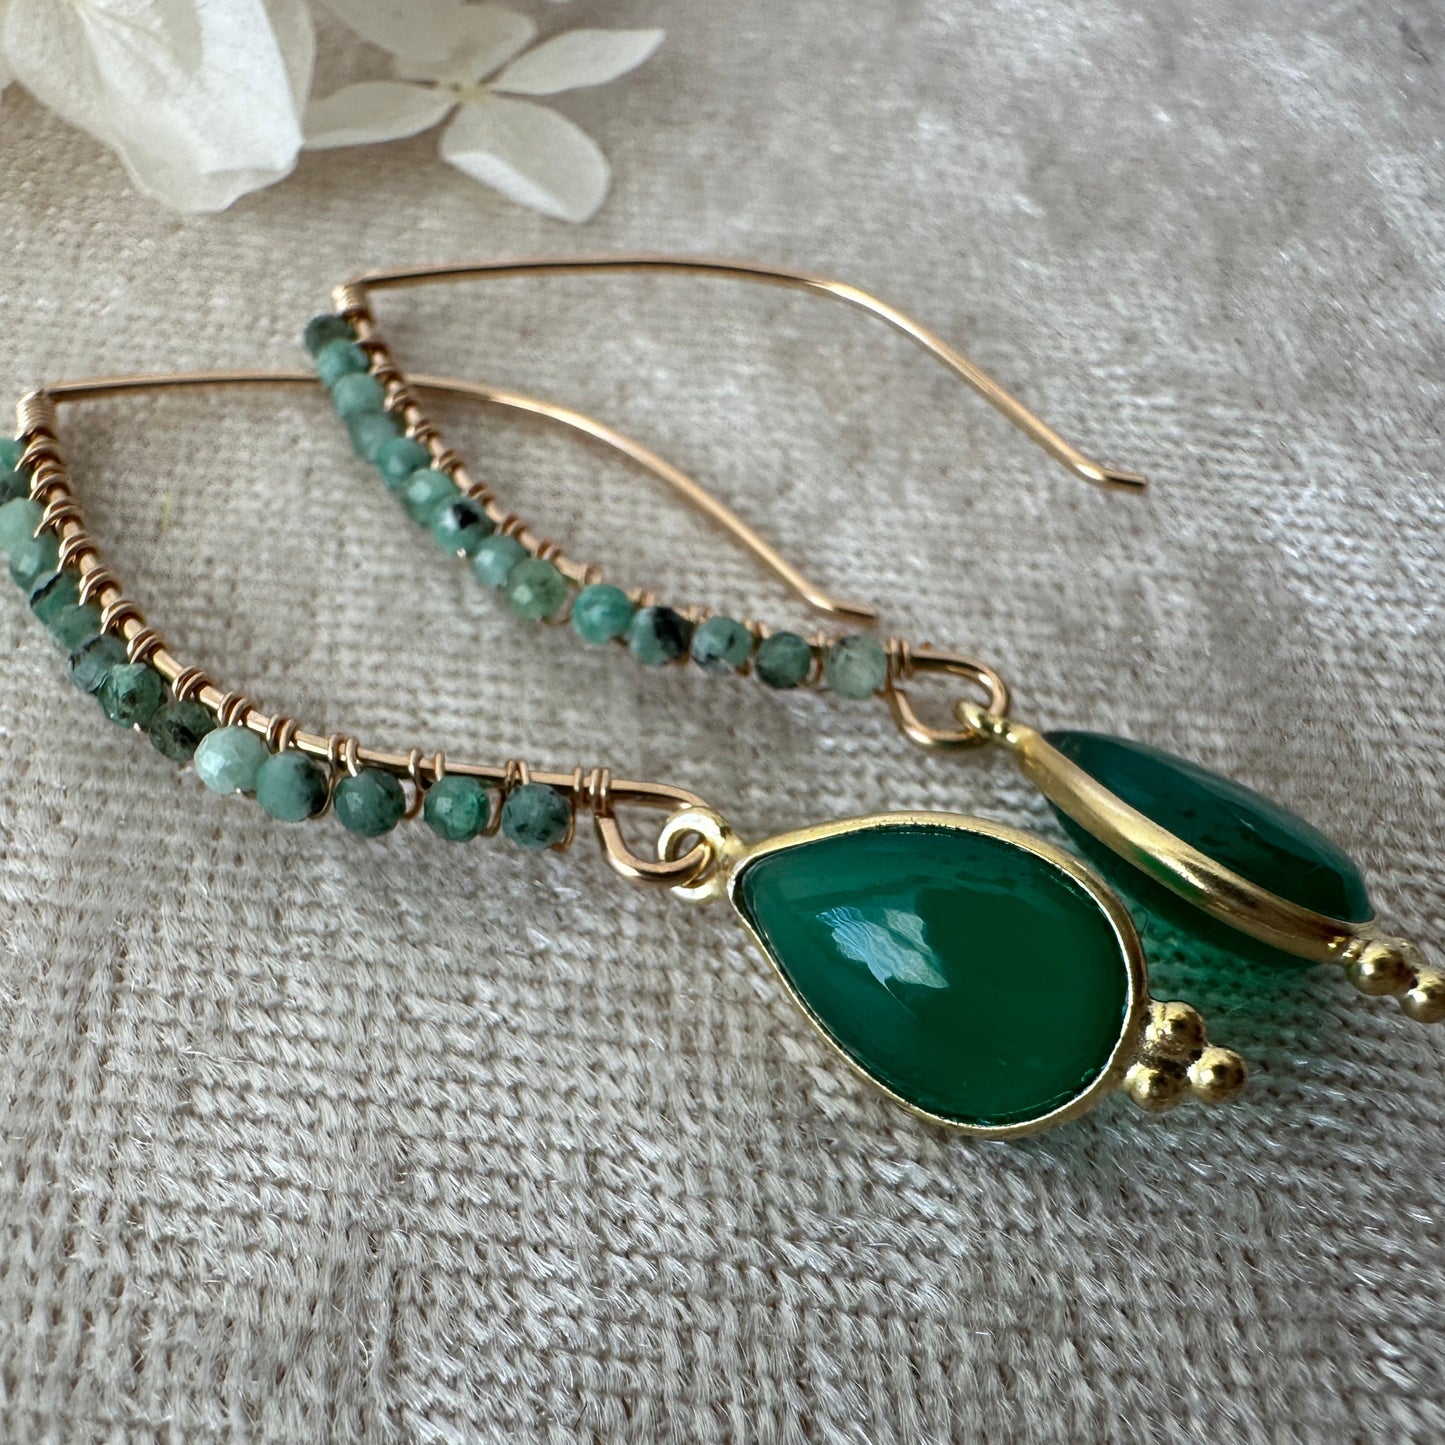 14kt Gold Filled Emerald and Green Onyx Threader Earrings